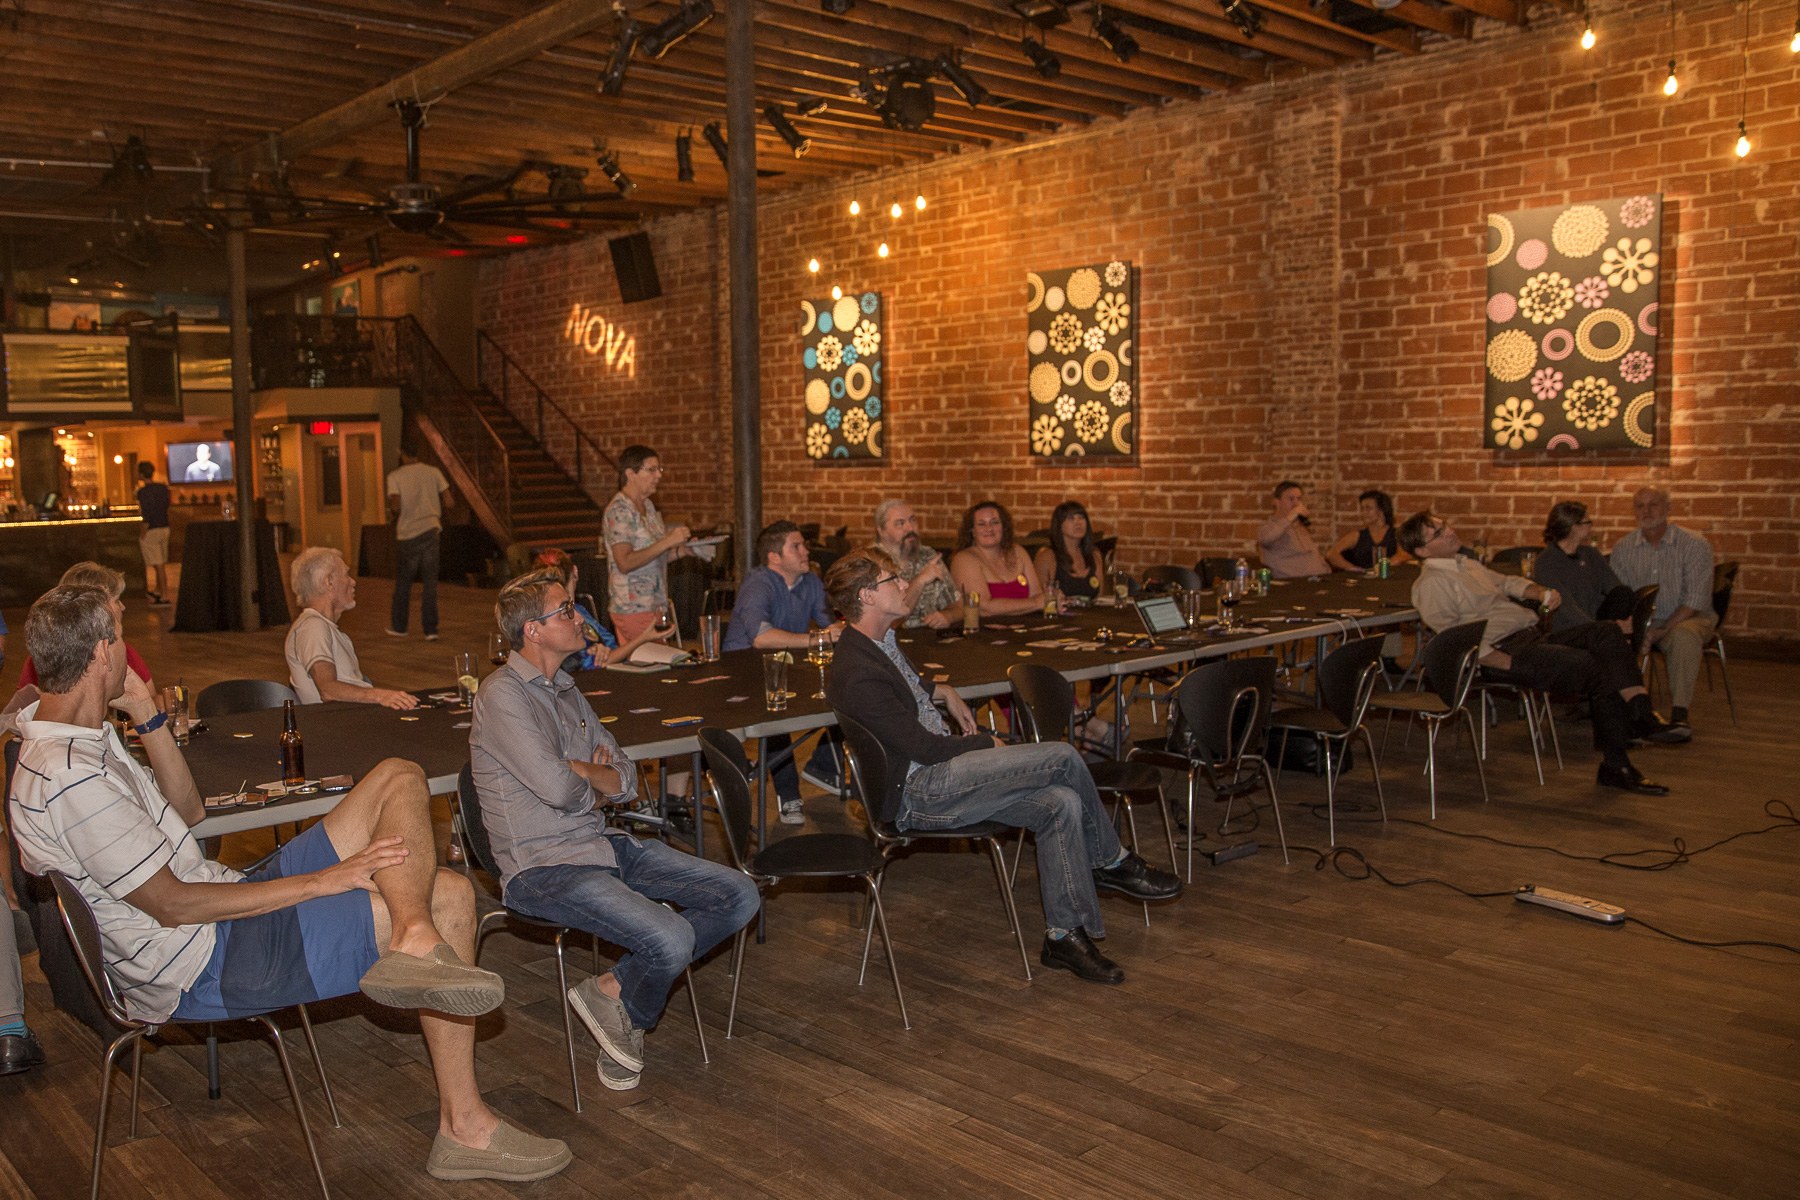 Swarm.City Boardwalk Release for Blockchain Enabled Commerce discussed here at Entrepreneur Social Club in DTSP at historic wedding and event venue NOVA 535 with Cate Colgan #pioneer